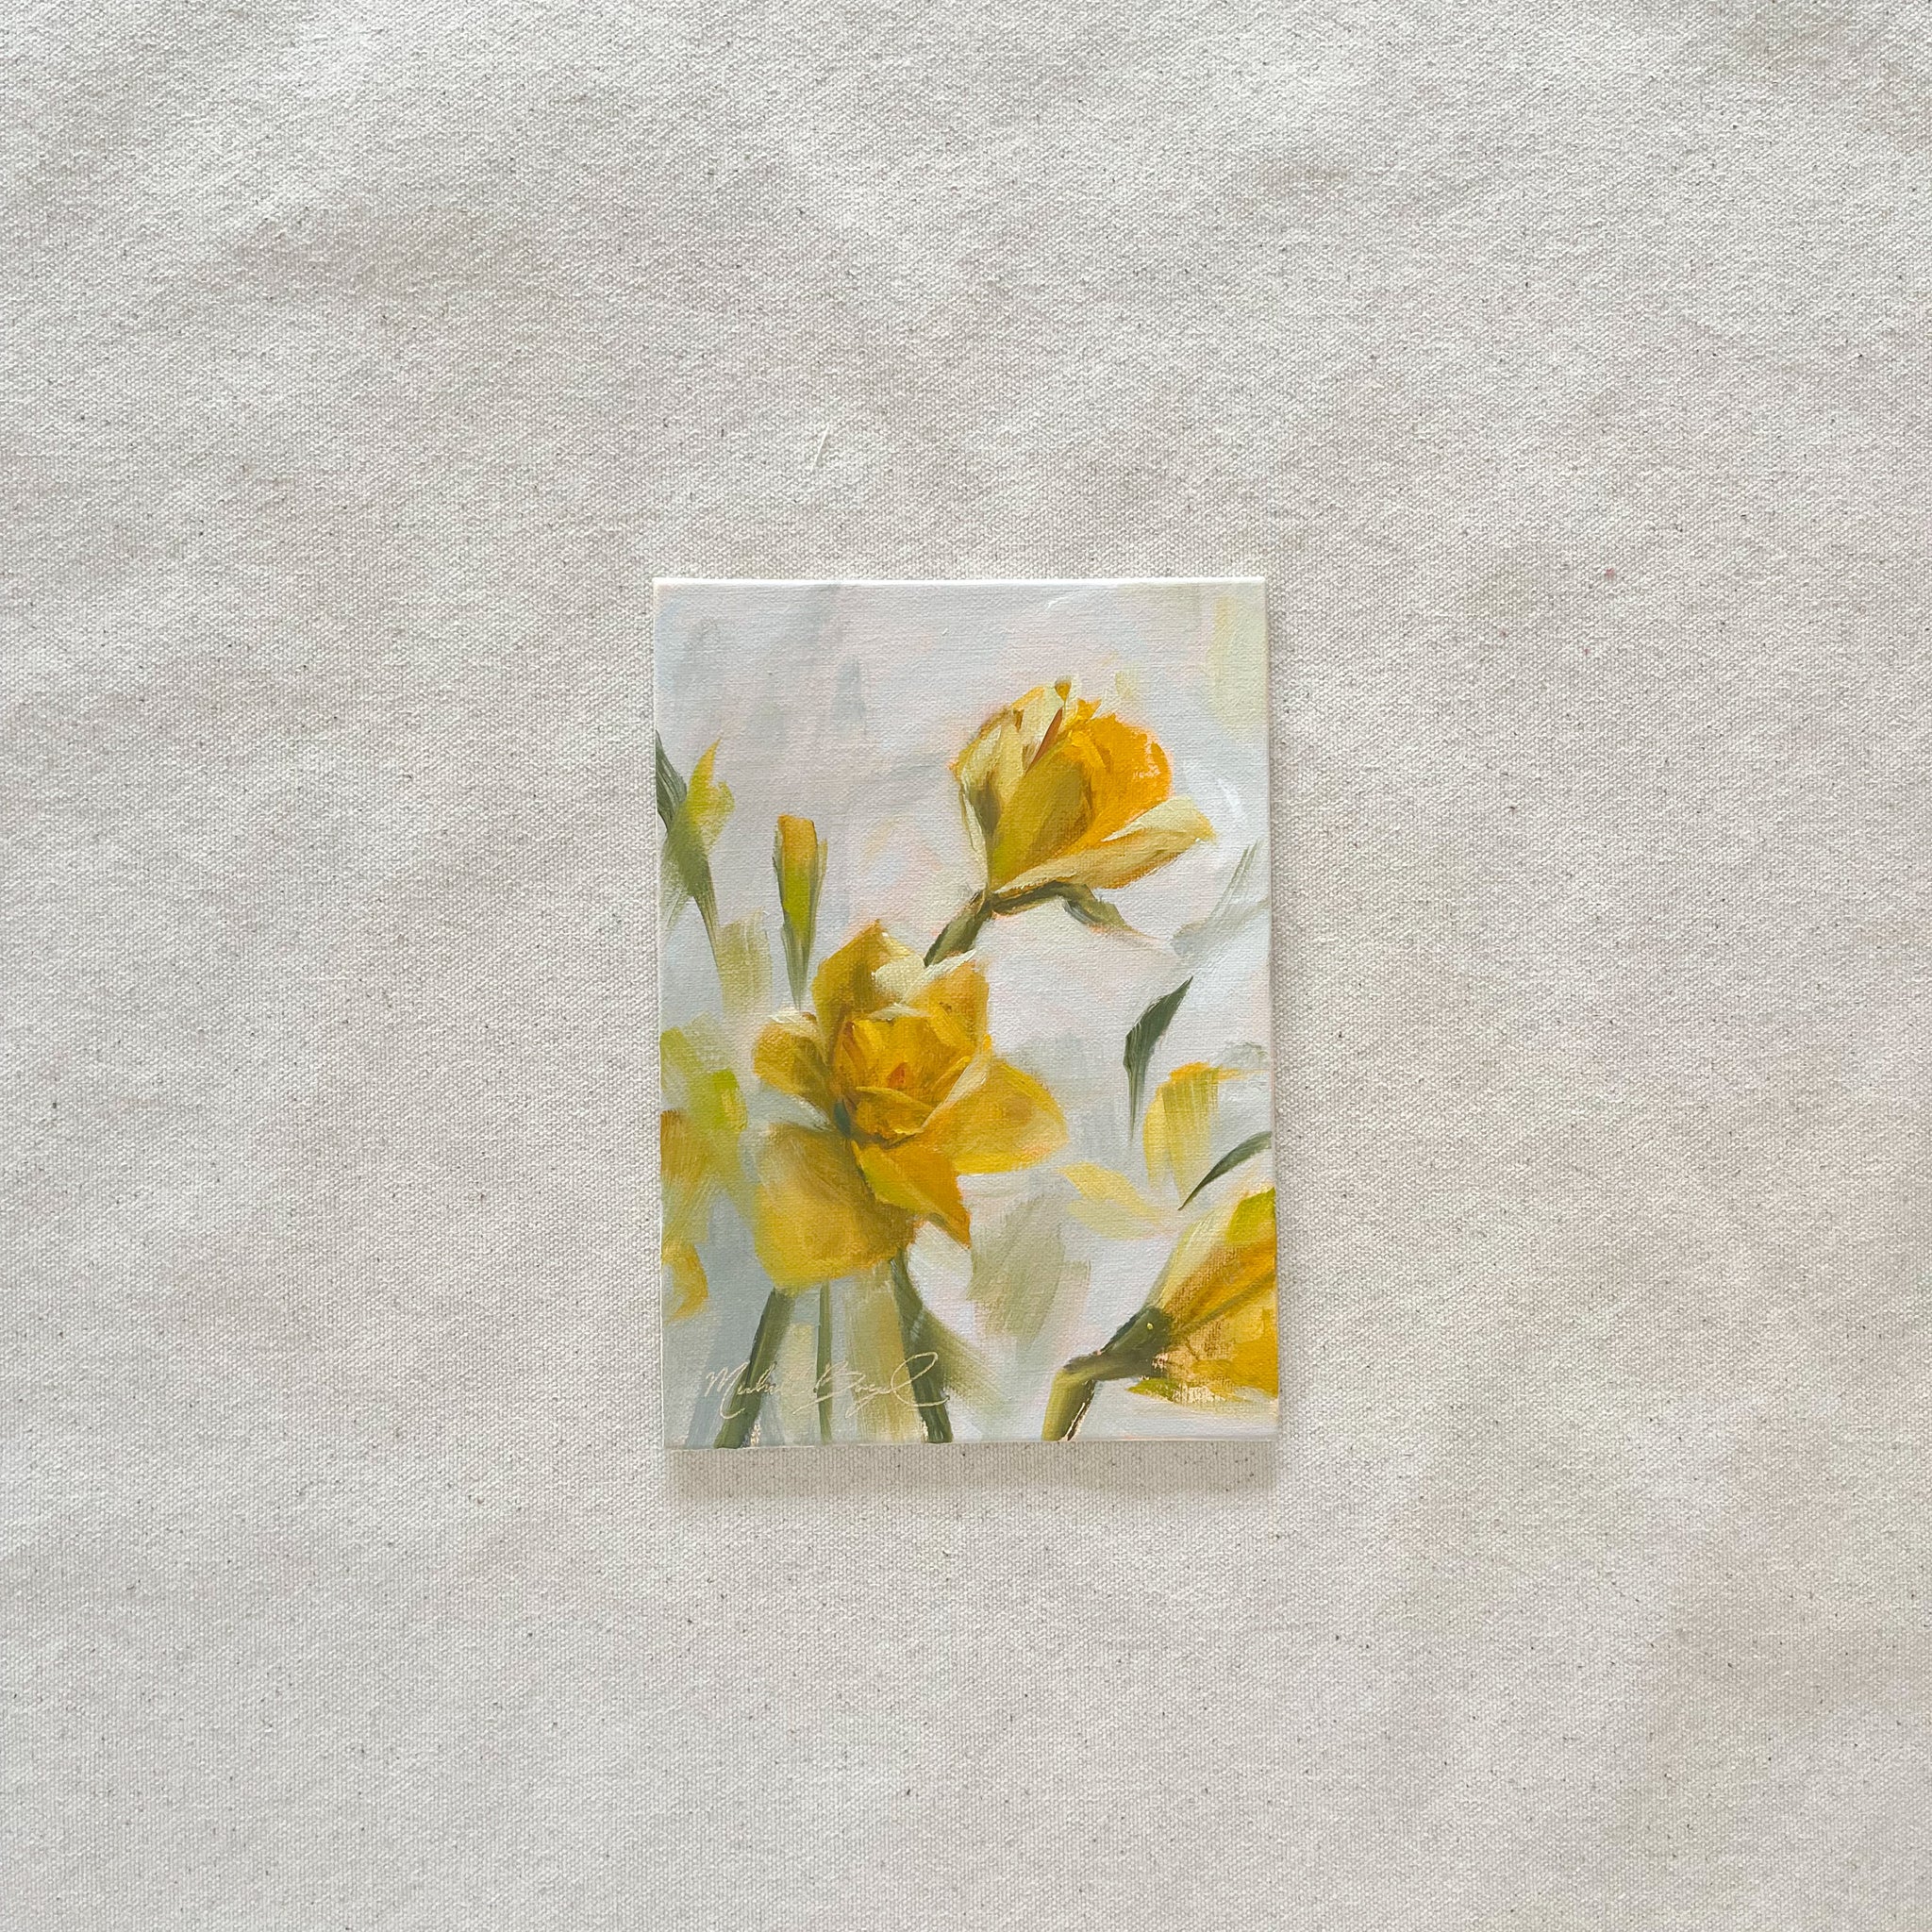 Daffies - 5x7" Oil on Panel